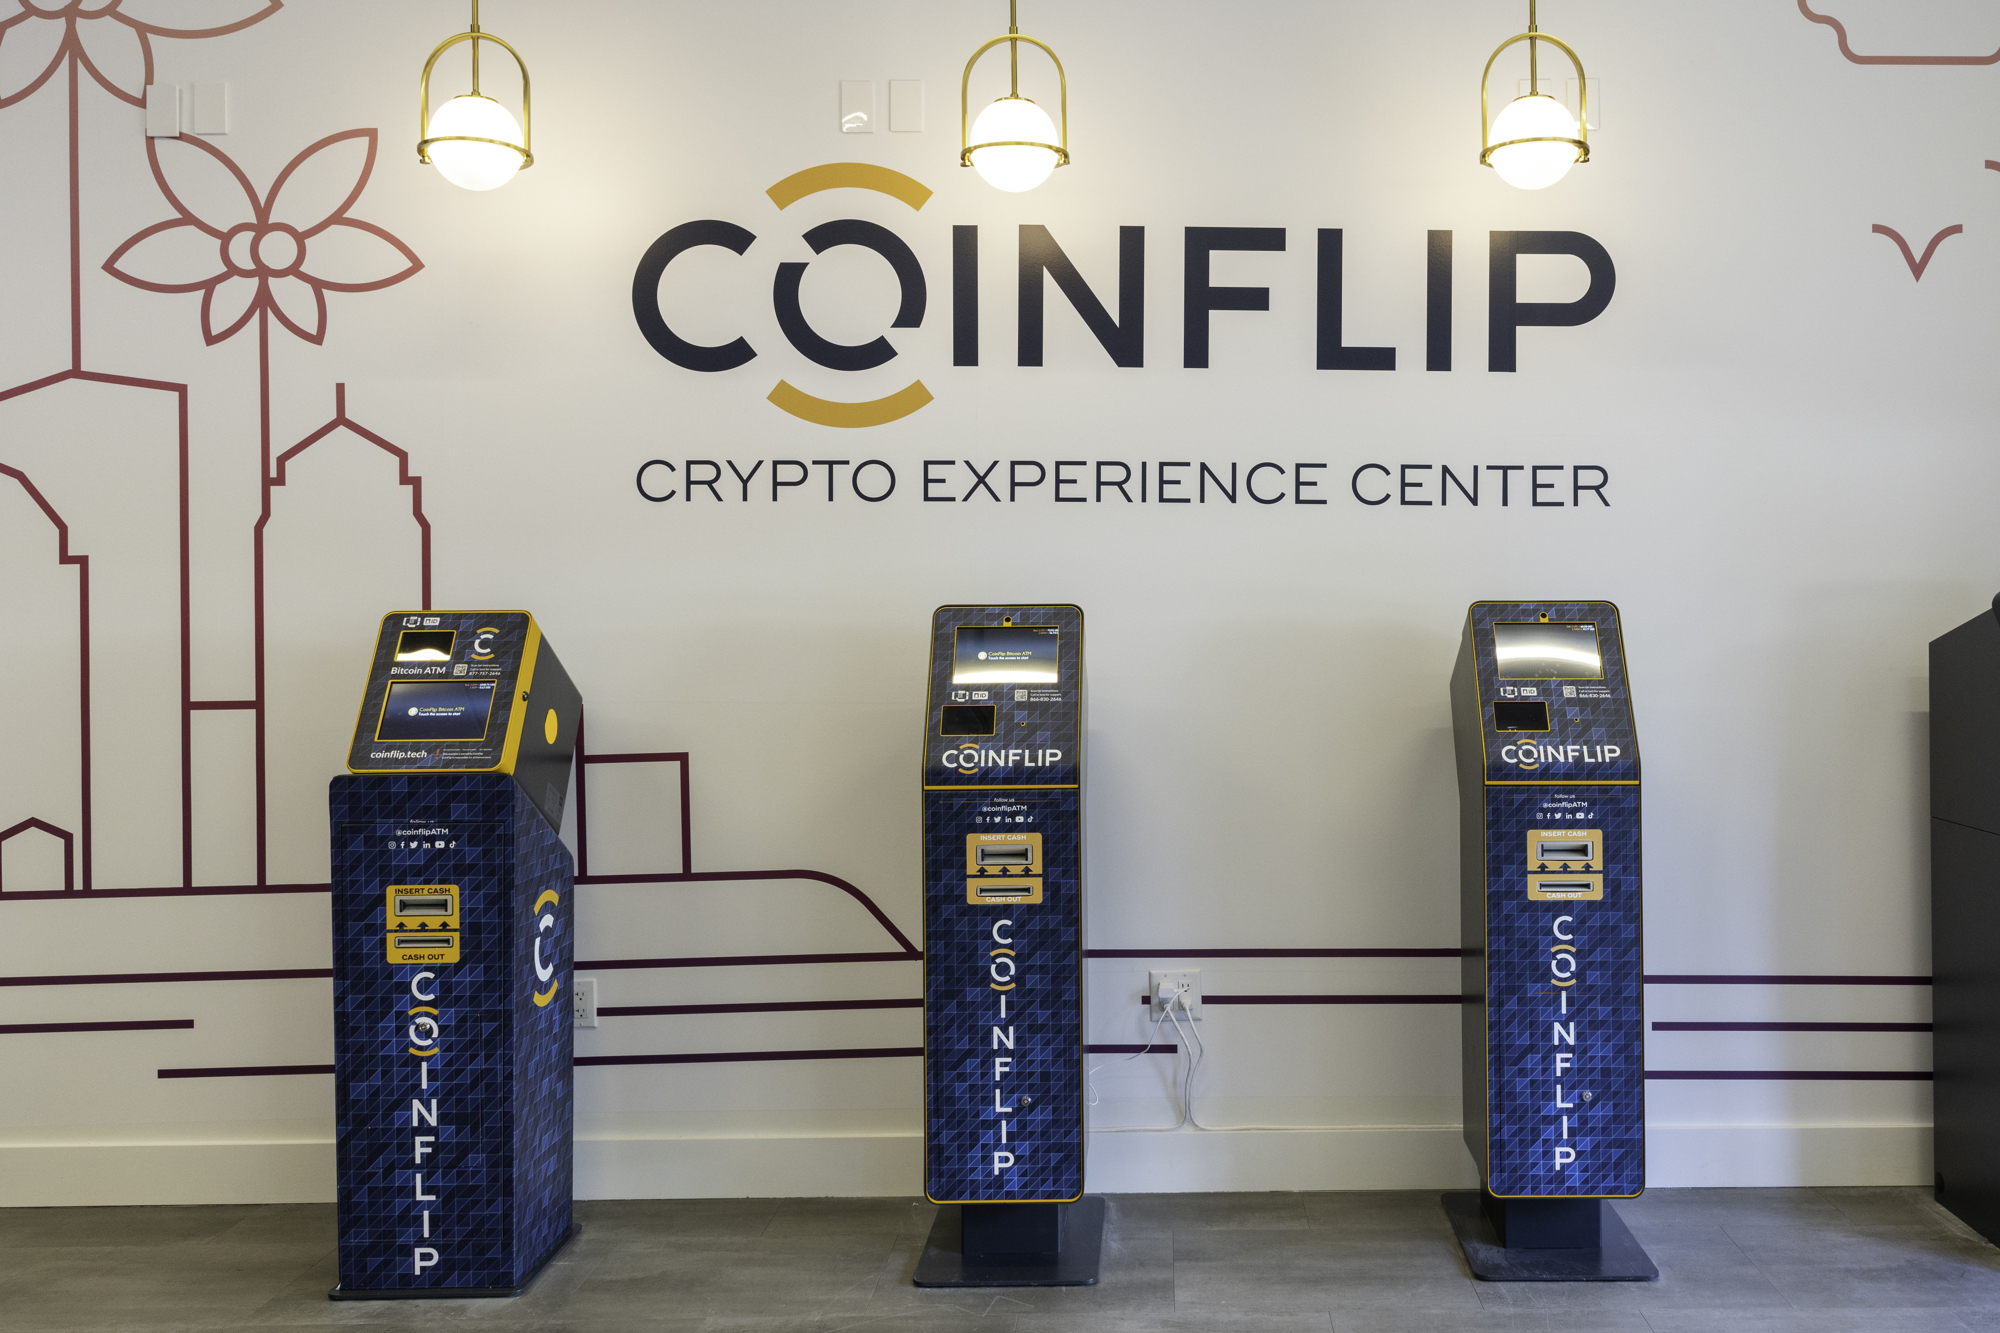 CoinFlip has opened an office in Tampa with plans to develop Web3 products and take the mystery out of cryptocurrencies. (Courtesy photo)